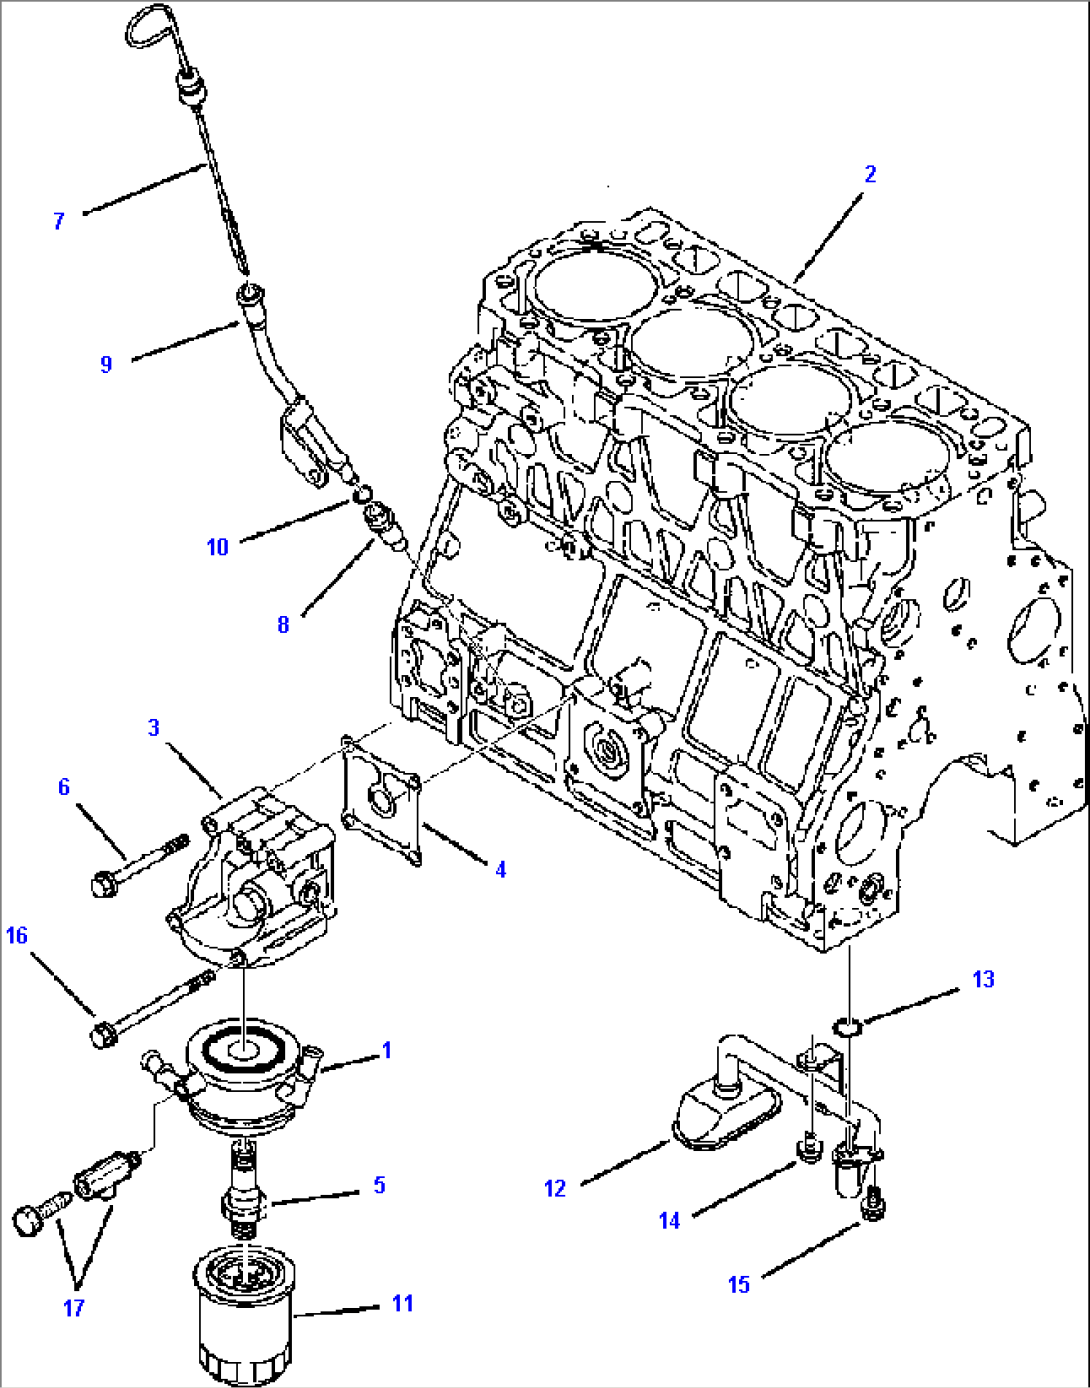 FIG. A0120-01A0 TIER I ENGINE - OIL COOLER AND FILTER, SUCTION LINE AND DIPSTICK